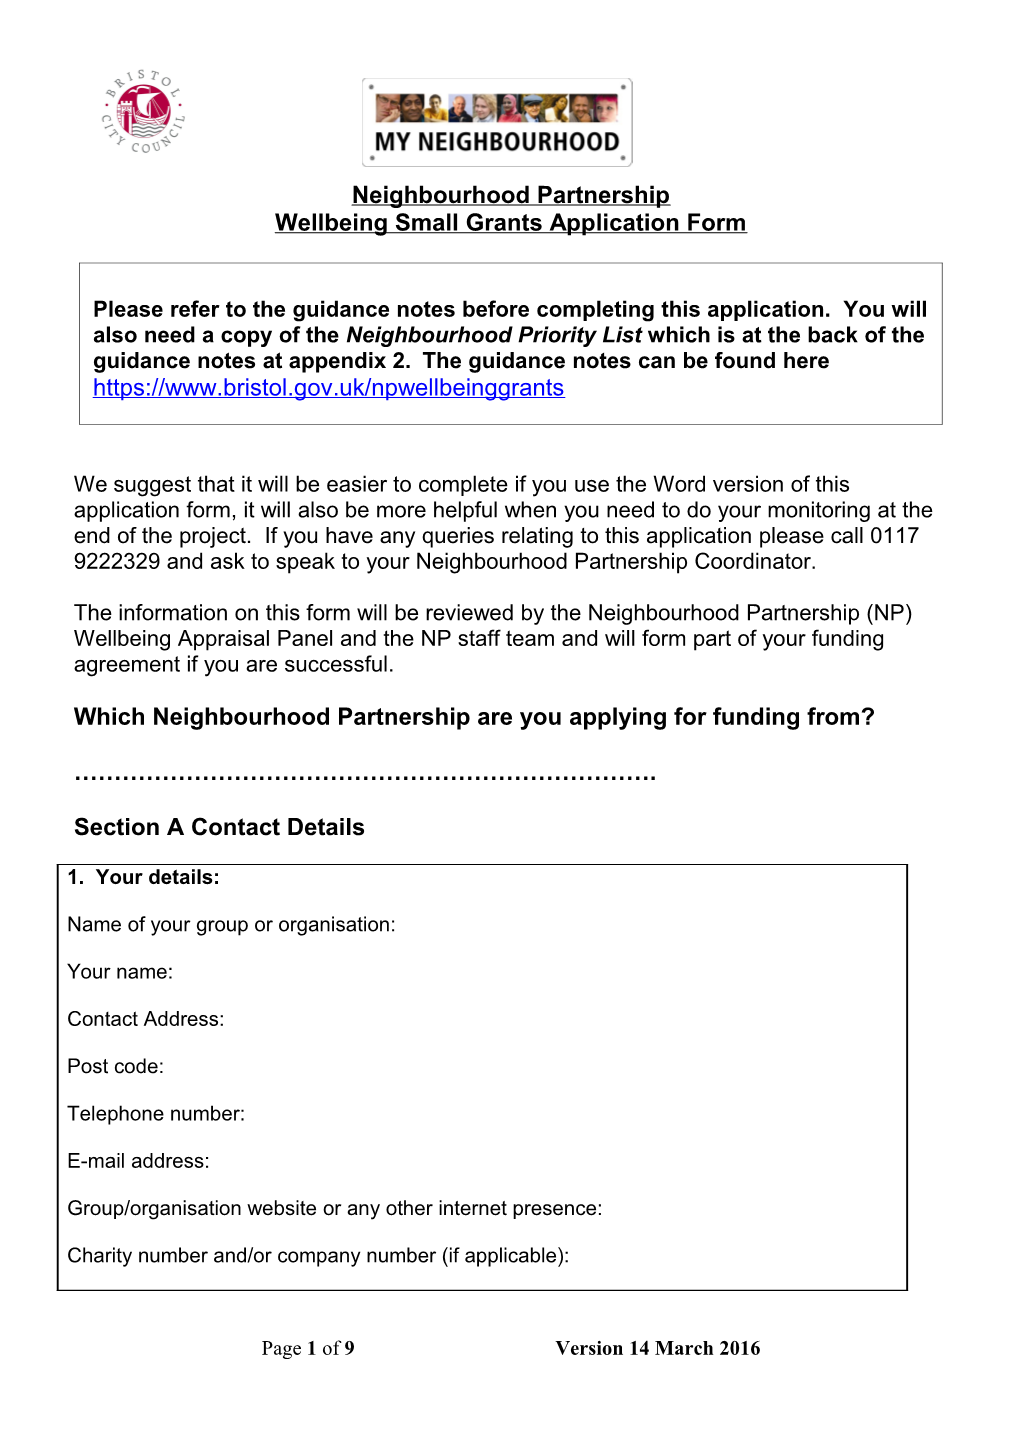 Wellbeing Small Grants Application Form